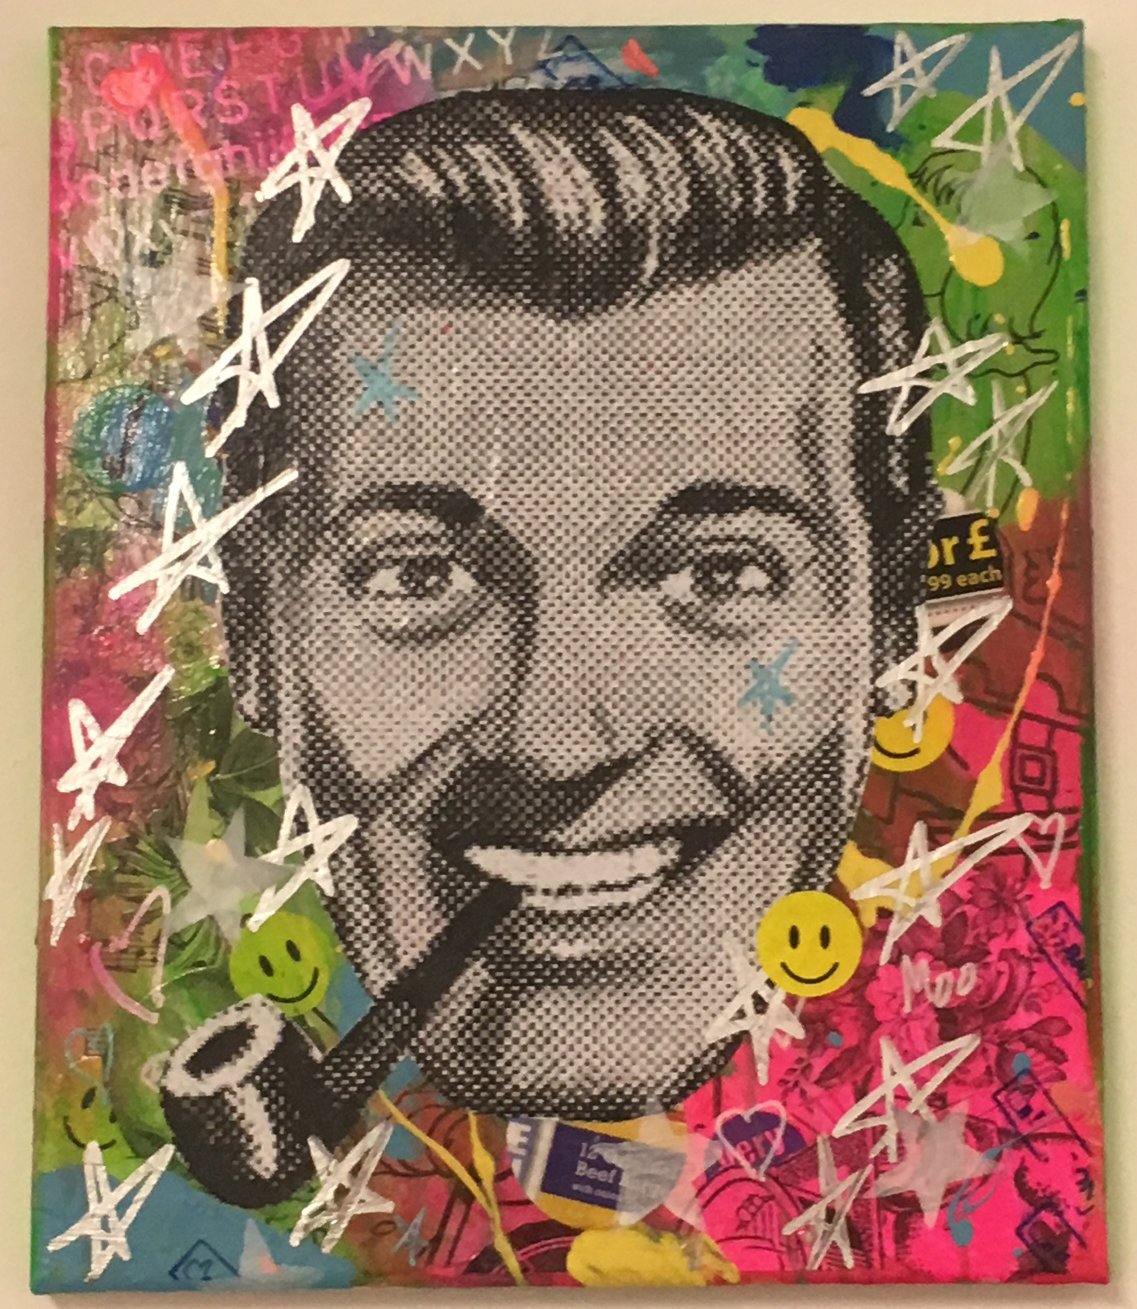 Bob by Barrie J Davies 2018, mixed media on canvas, 25cm x 30cm, unframed, Barrie J Davies is an Artist - Pop Art and Street art inspired Artist based in Brighton England UK - Pop Art Paintings, Street Art Prints & Editions available